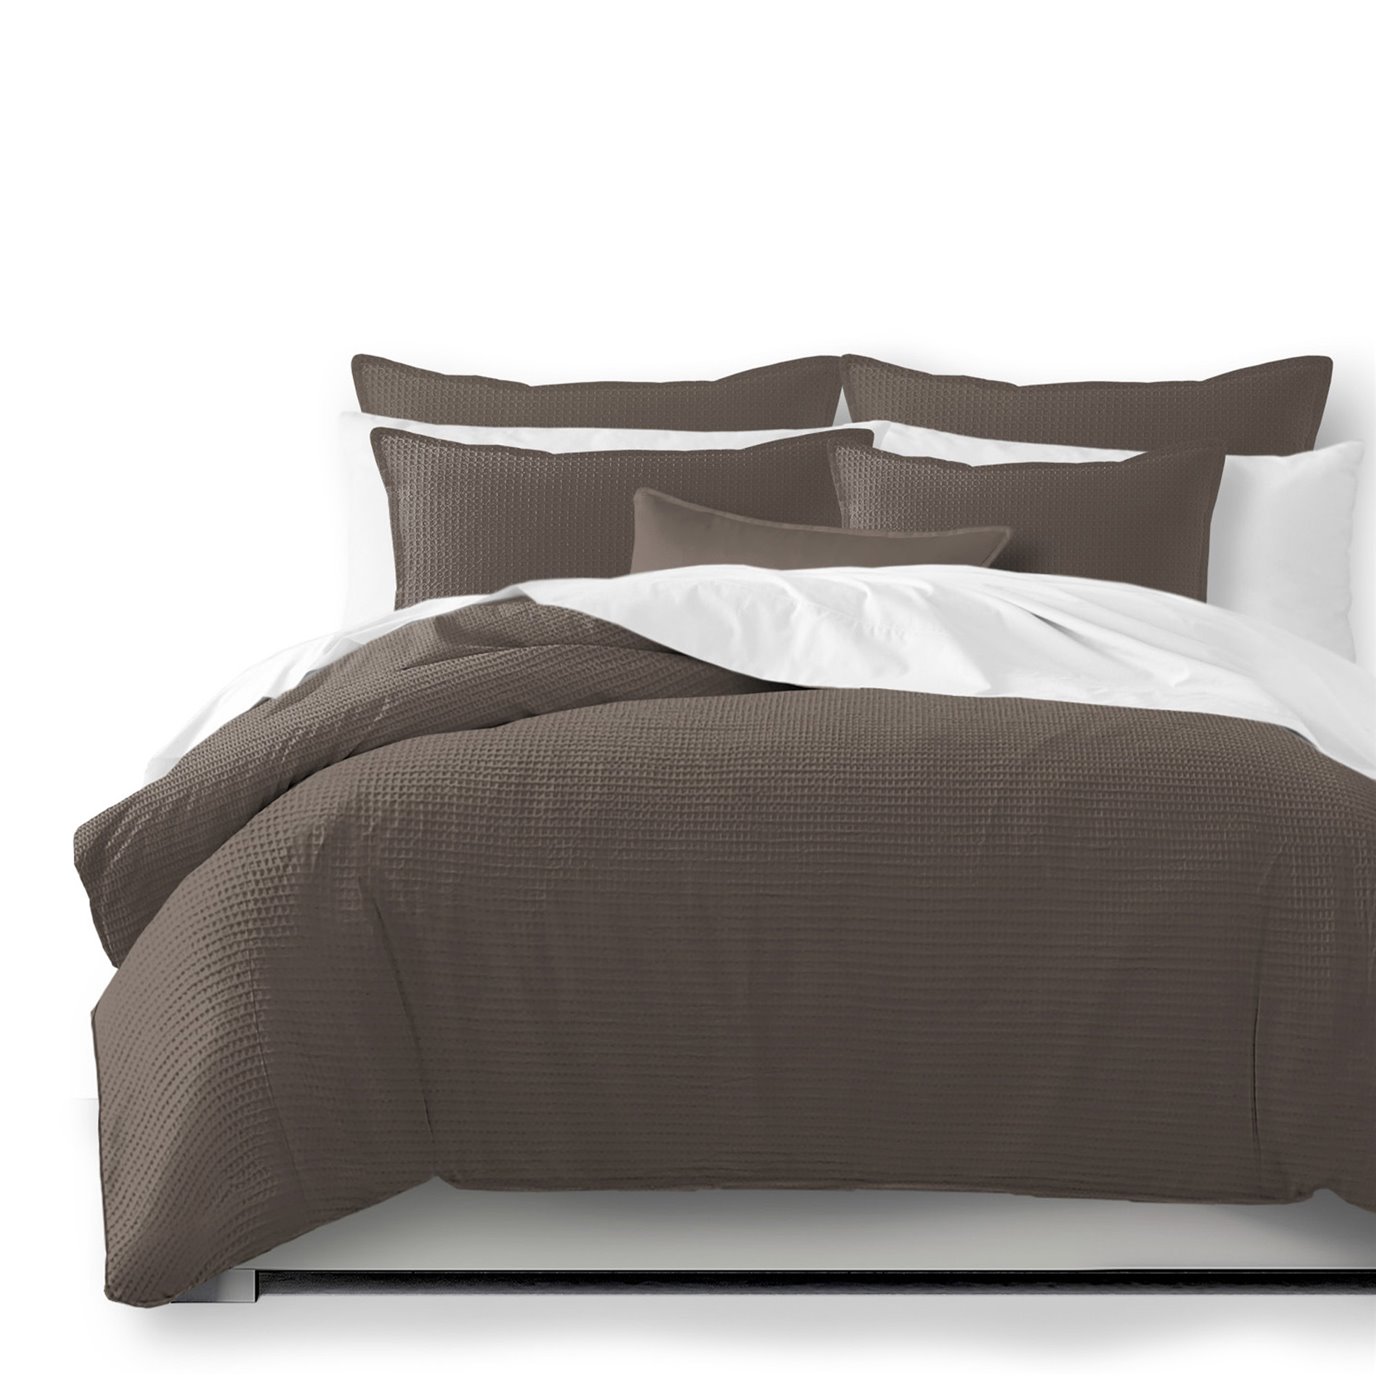 Classic Waffle Mocca Duvet Cover and Pillow Sham(s) Set - Size Full